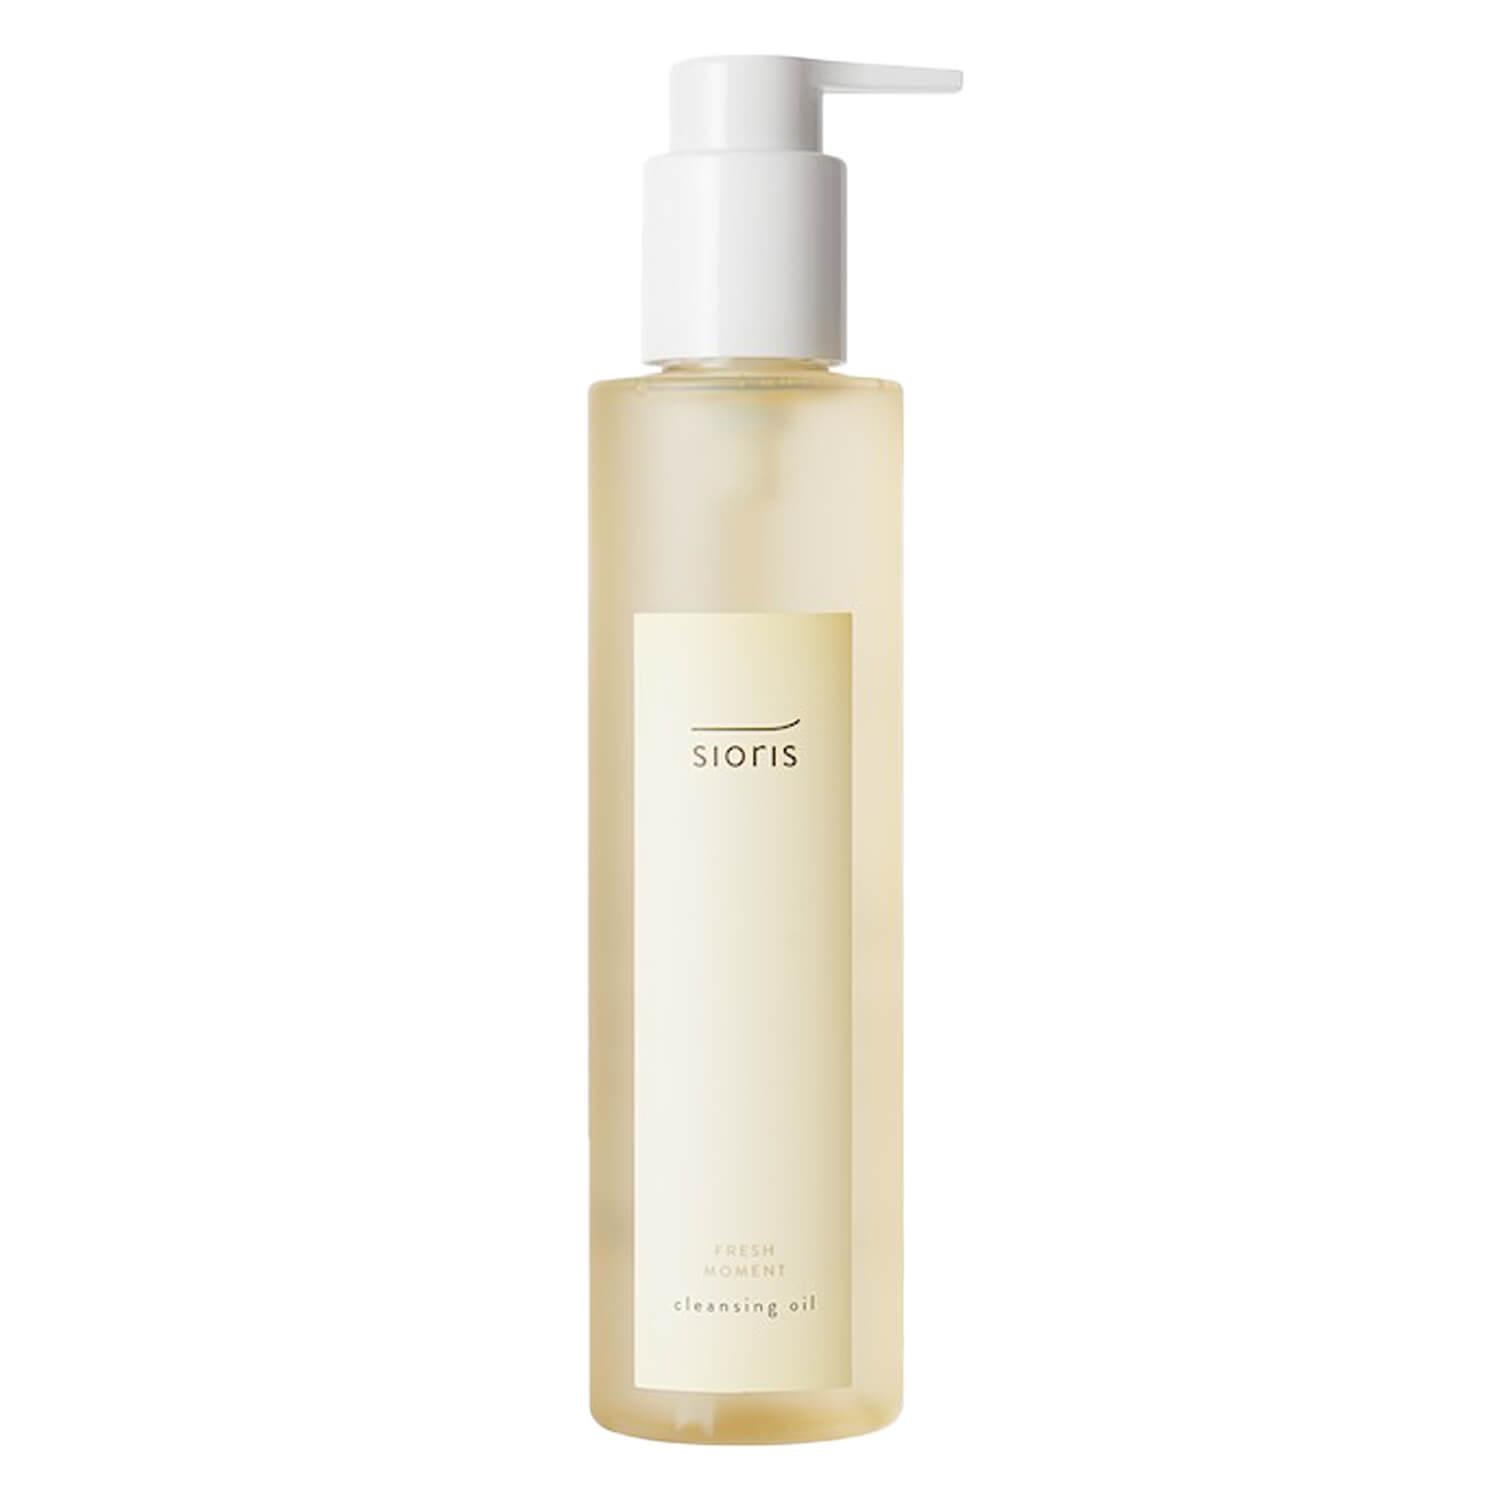 sioris - FRESH MOMENT Cleansing Oil